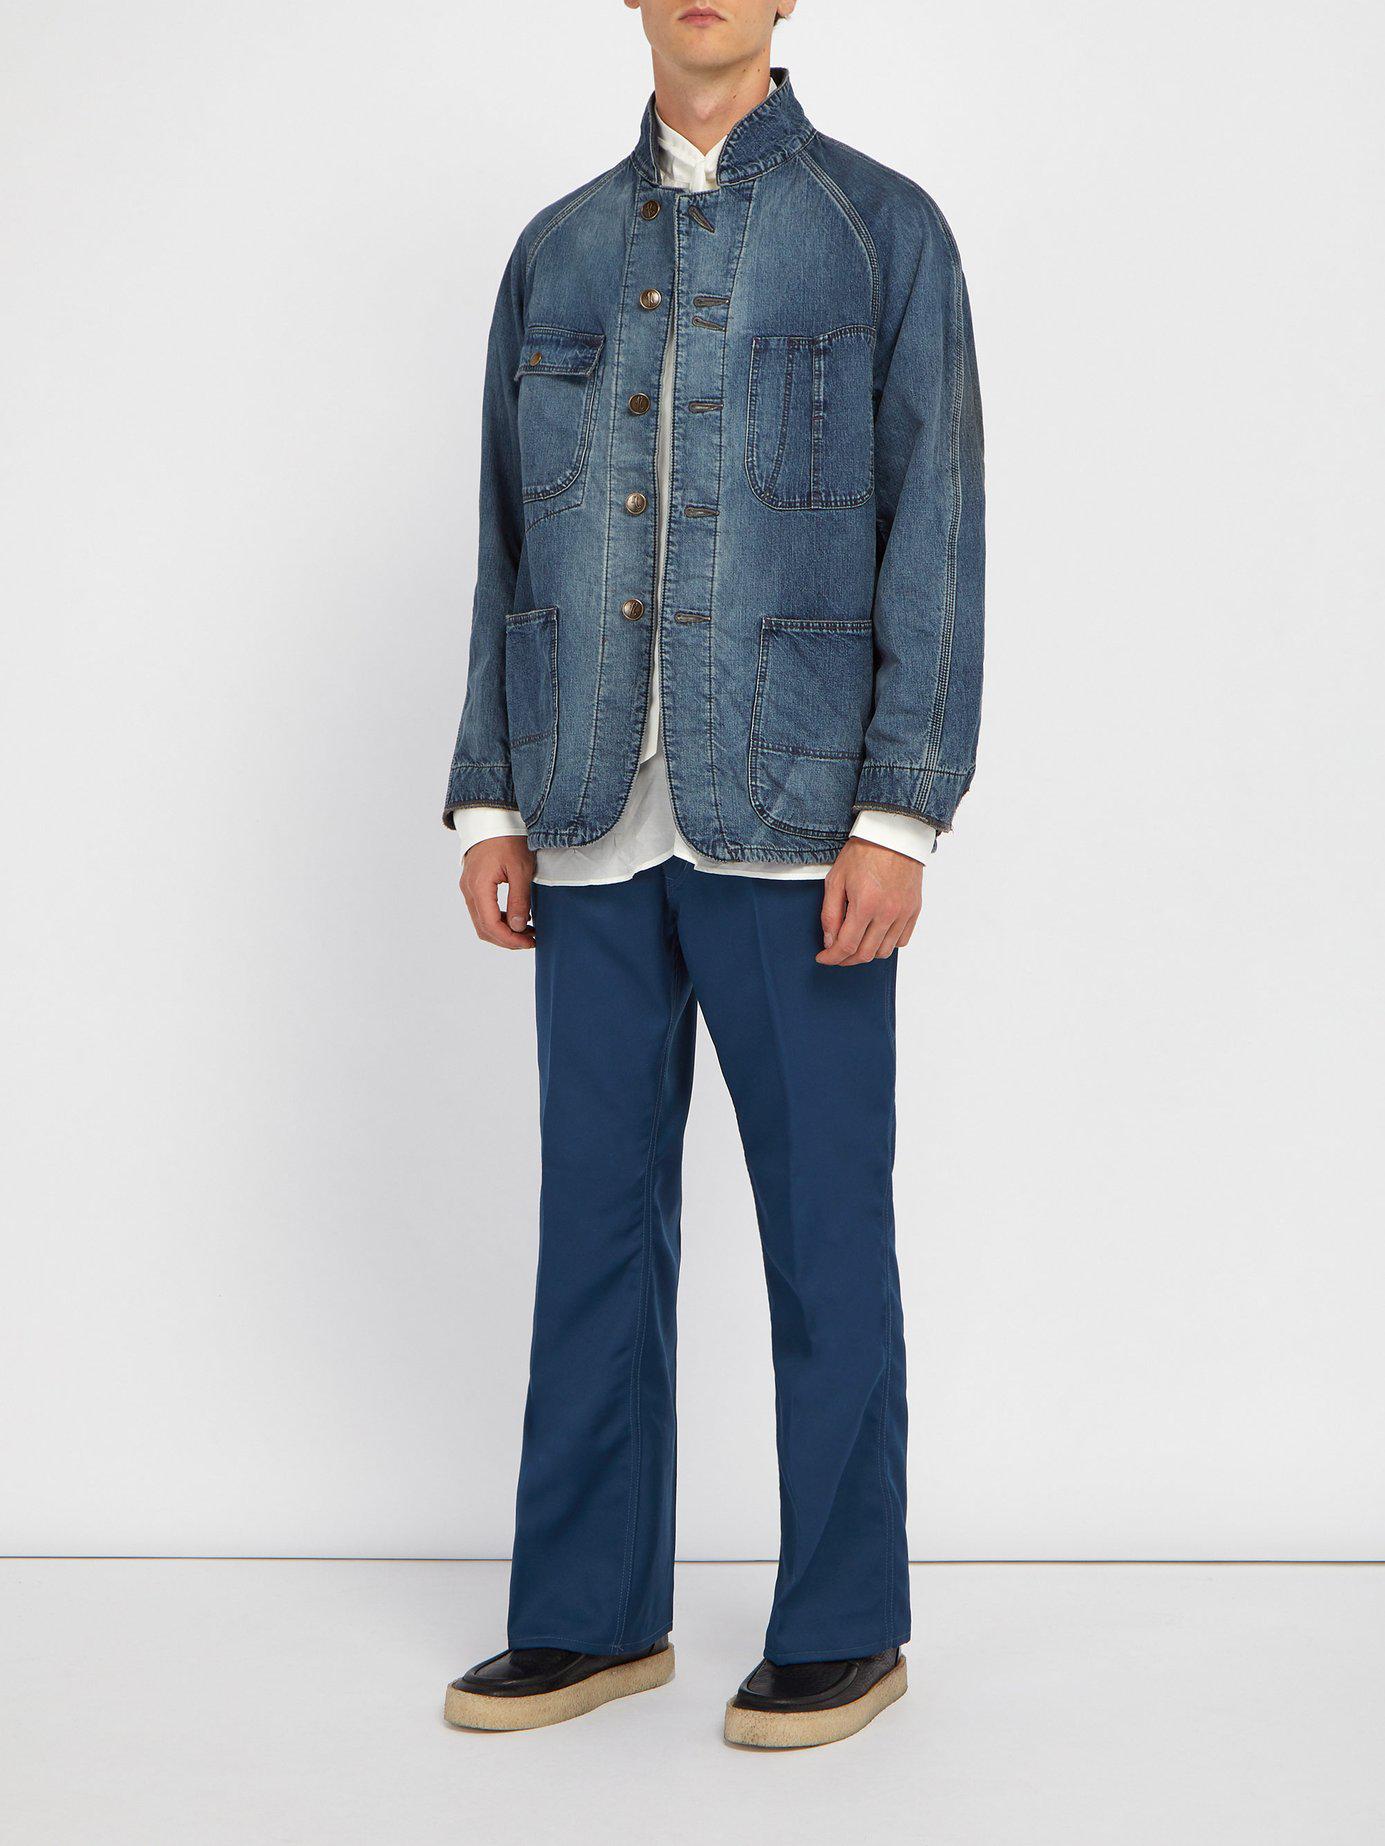 Needles Boot-cut Trousers in Blue for Men - Lyst